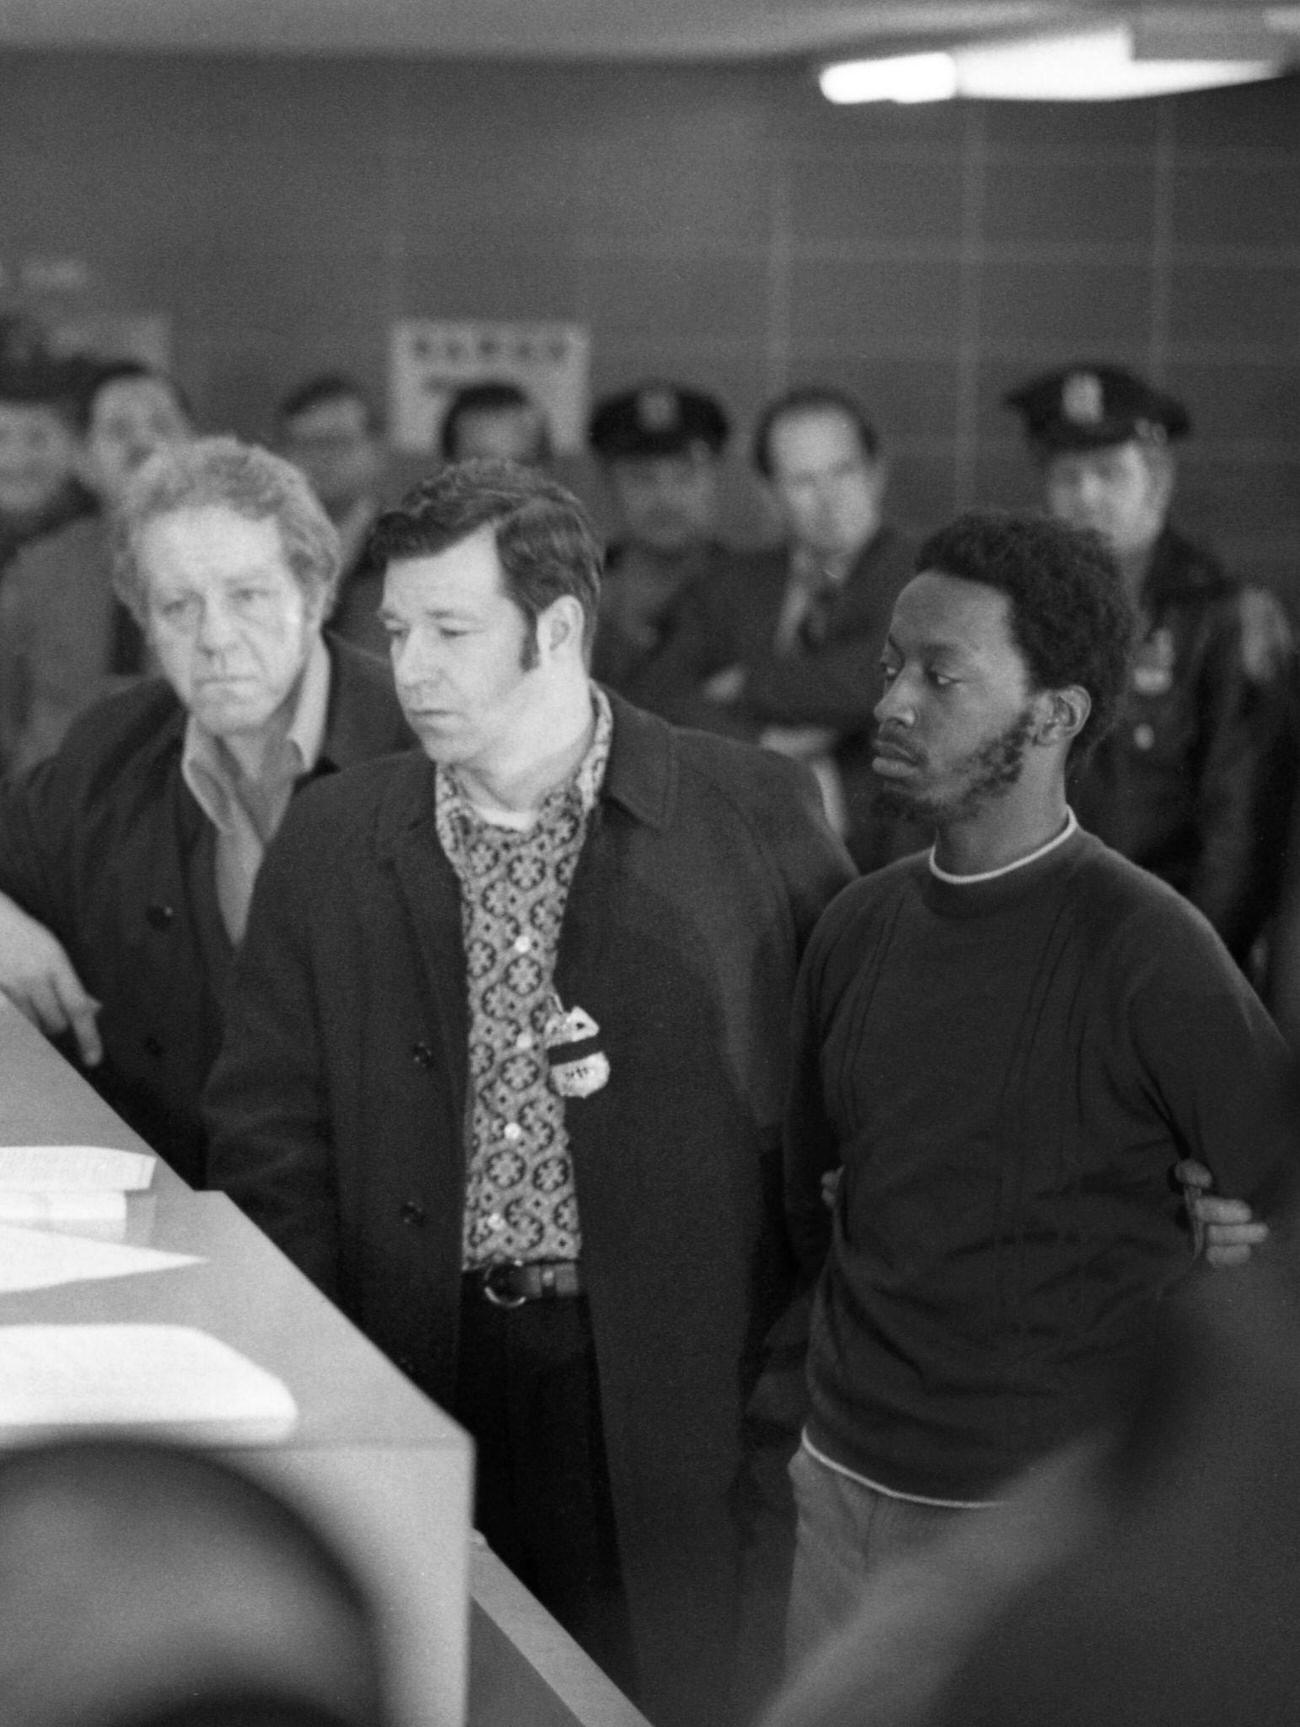 Salih Ali Abdullah Booked For Murder And Robbery In Brooklyn Hostage Siege, 1973